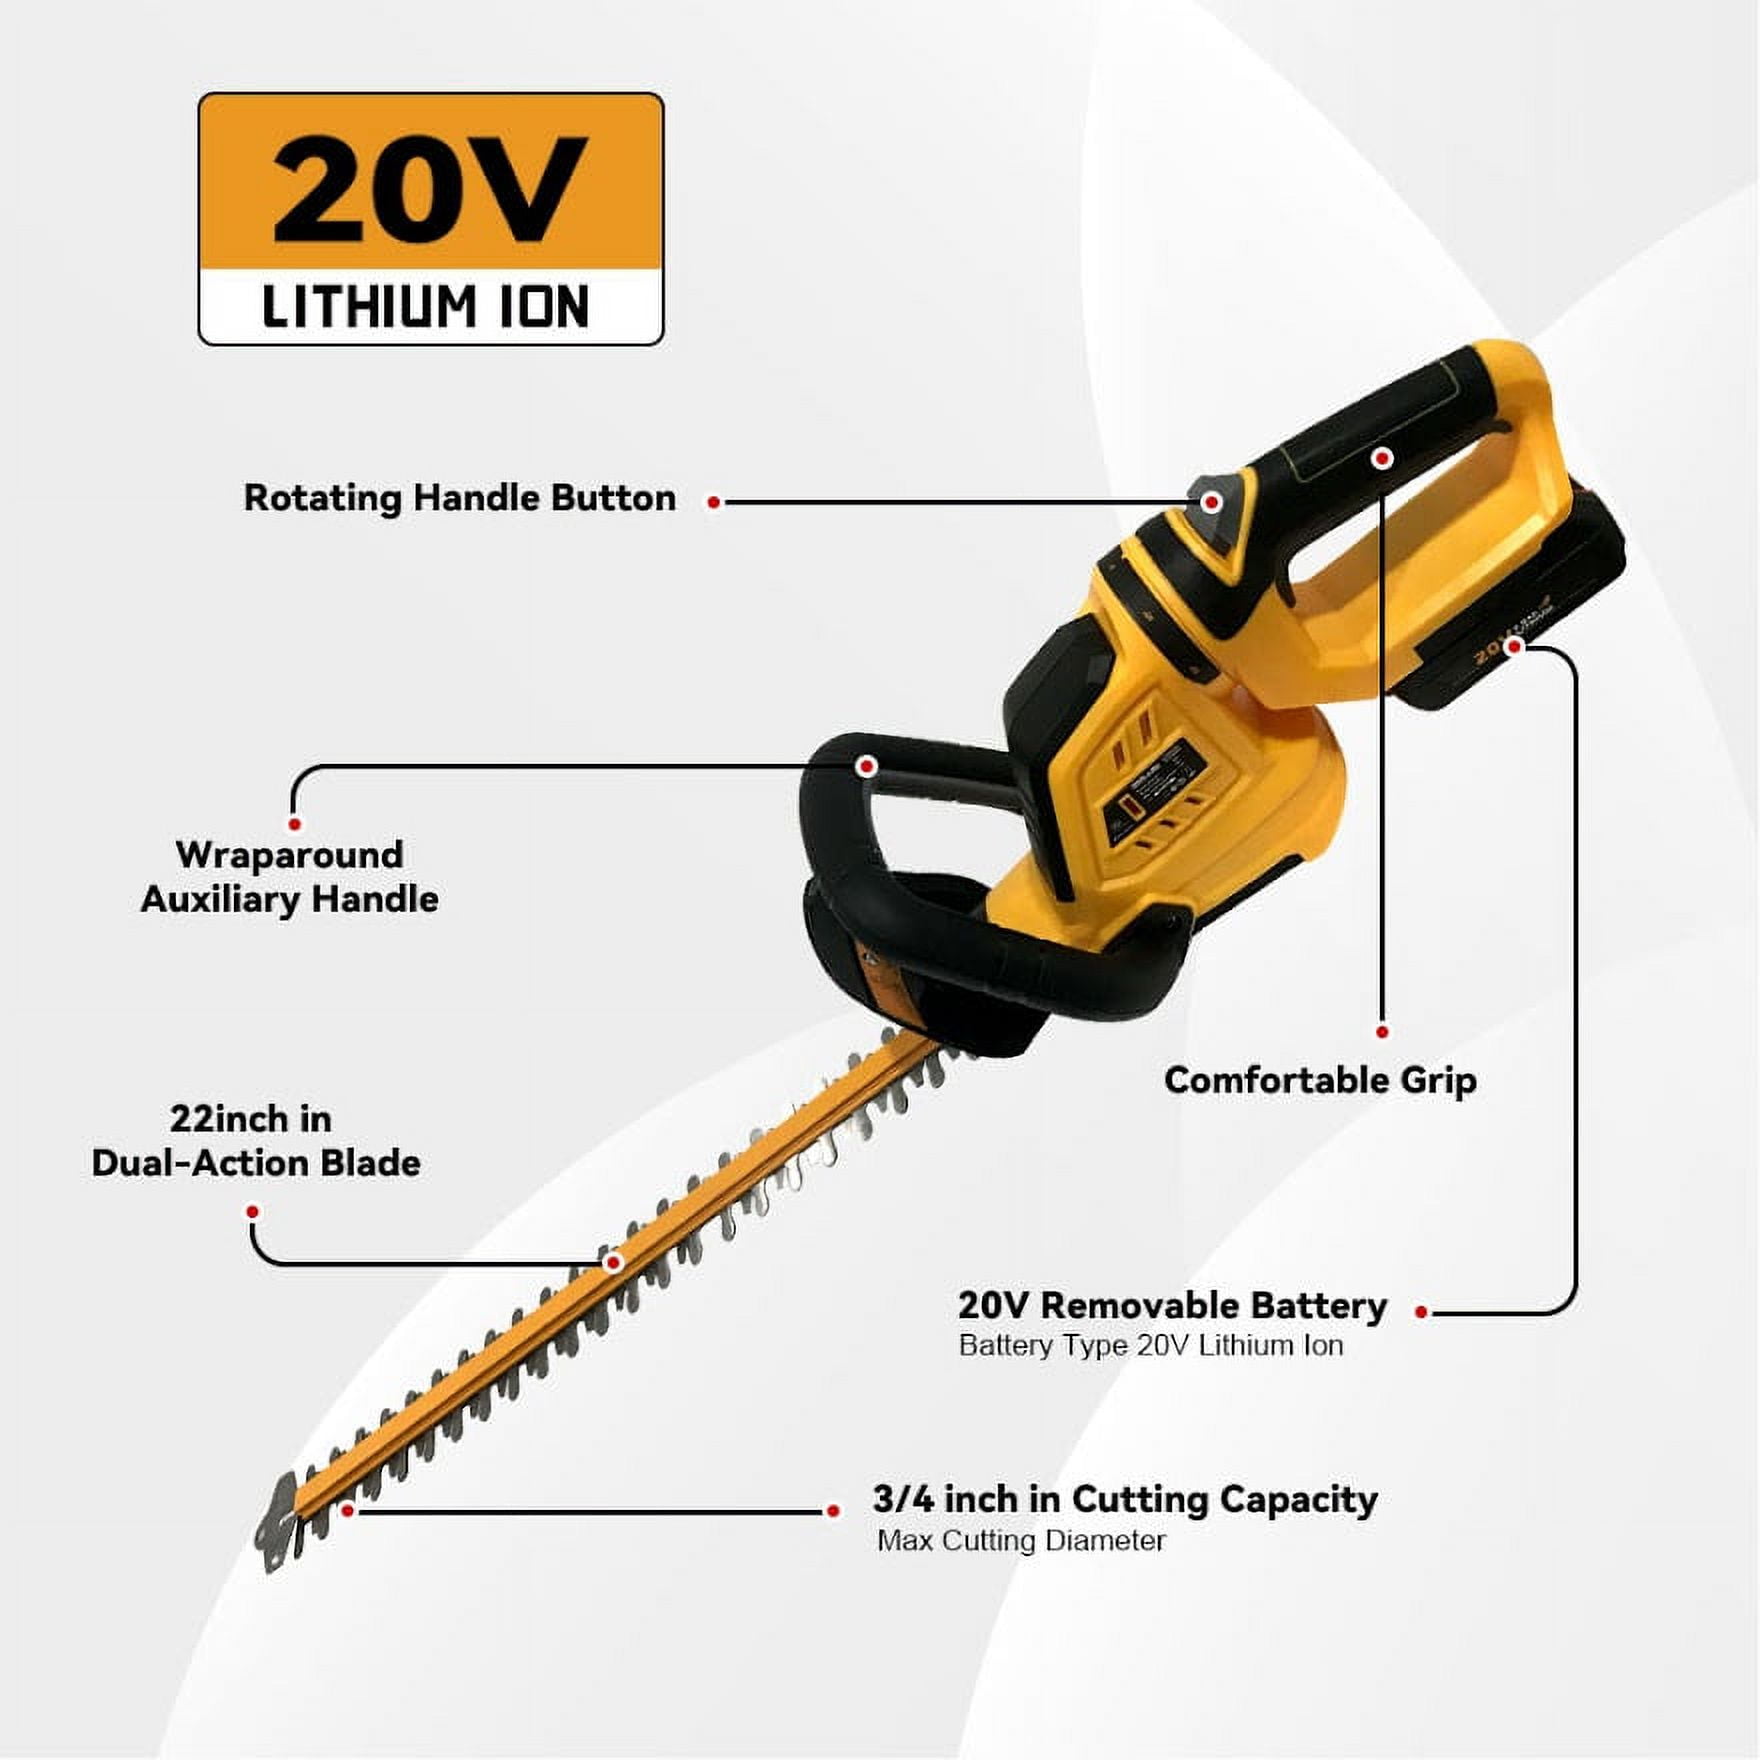 VEVOR 20V Cordless Hedge Trimmer, 18 inch Double-edged Steel Blade, Hedge  Trimmer Kit 20V Battery, Fast Charger, and Blade Cover Included, 180°  Rotating Head